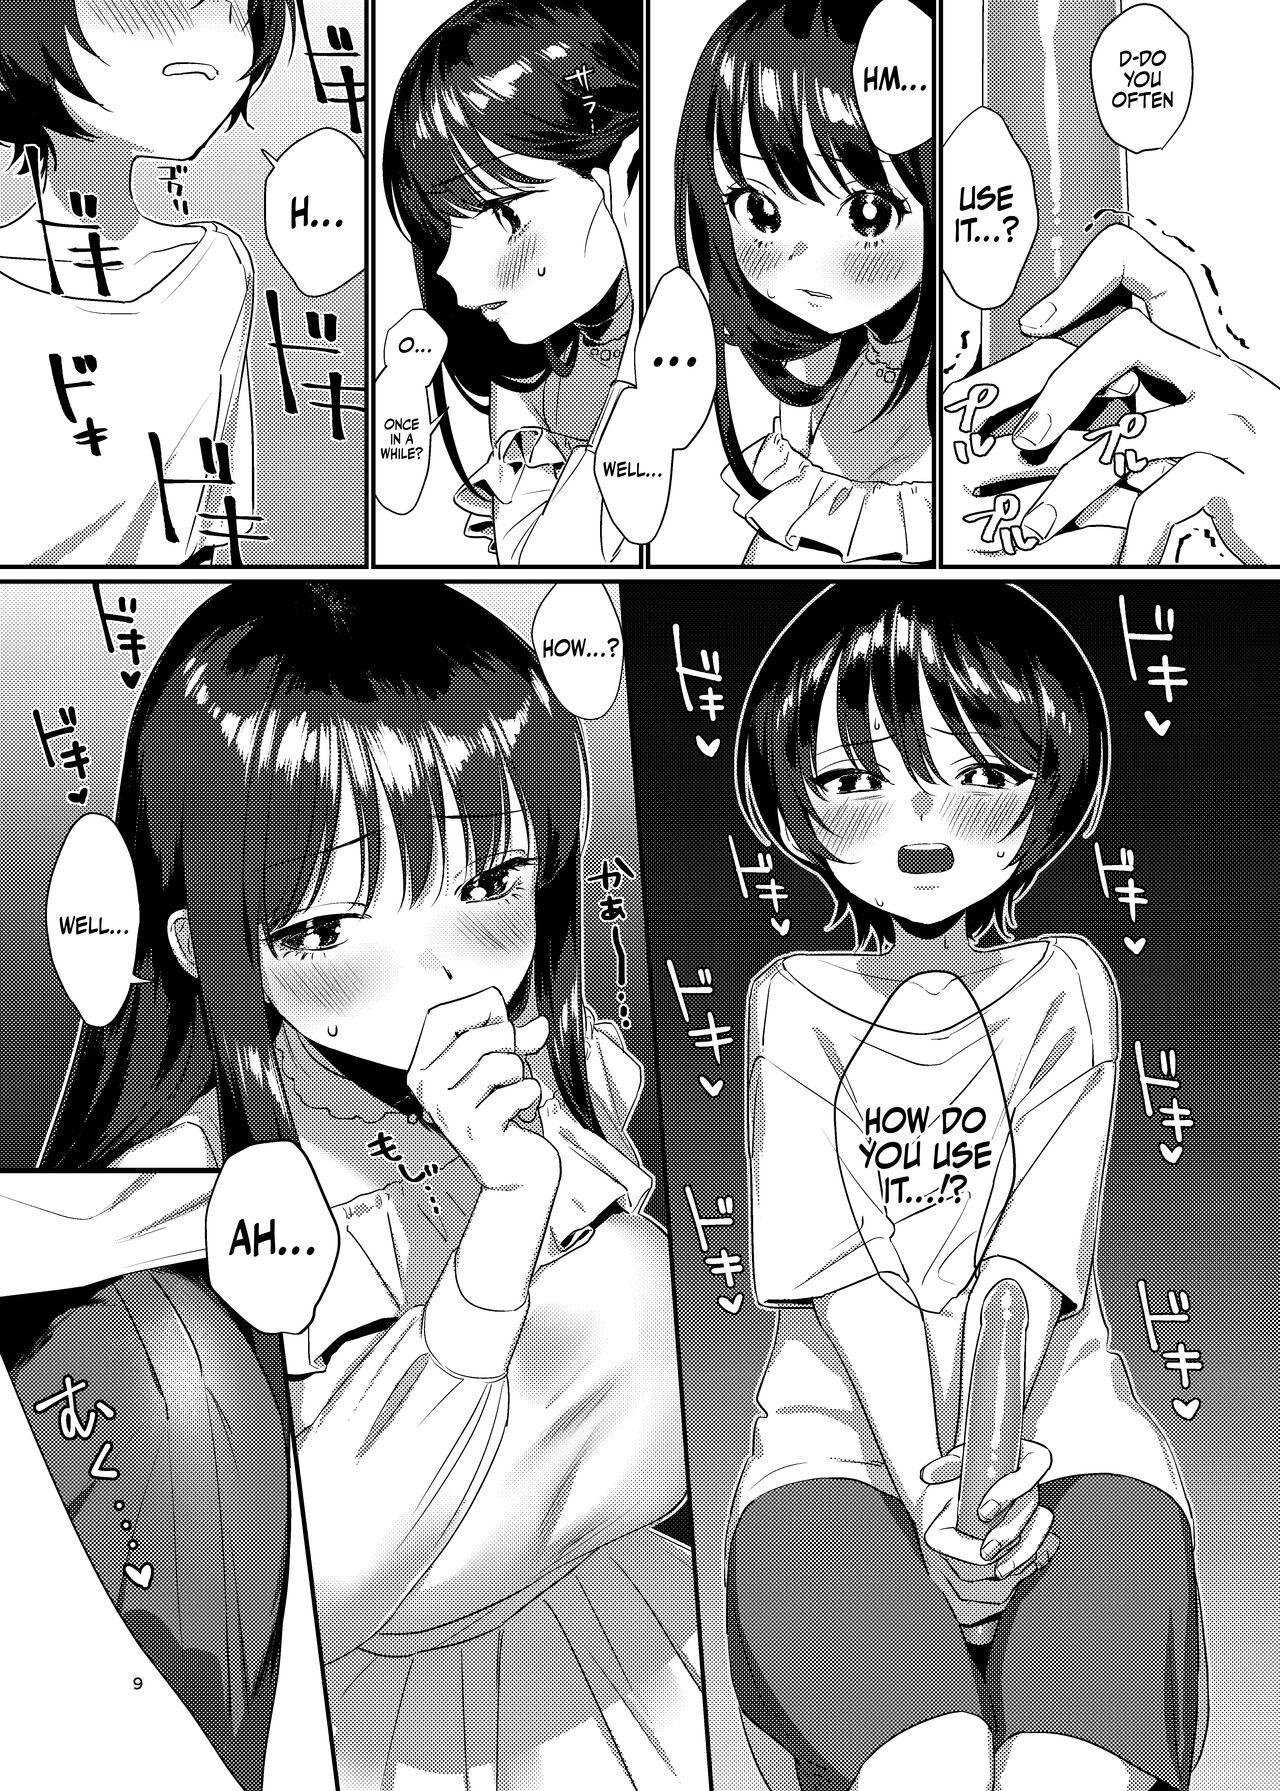 Best Blowjobs Ame, Nochi to Nari no Onee-san | Ame, Later Sister - Original Fellatio - Page 8